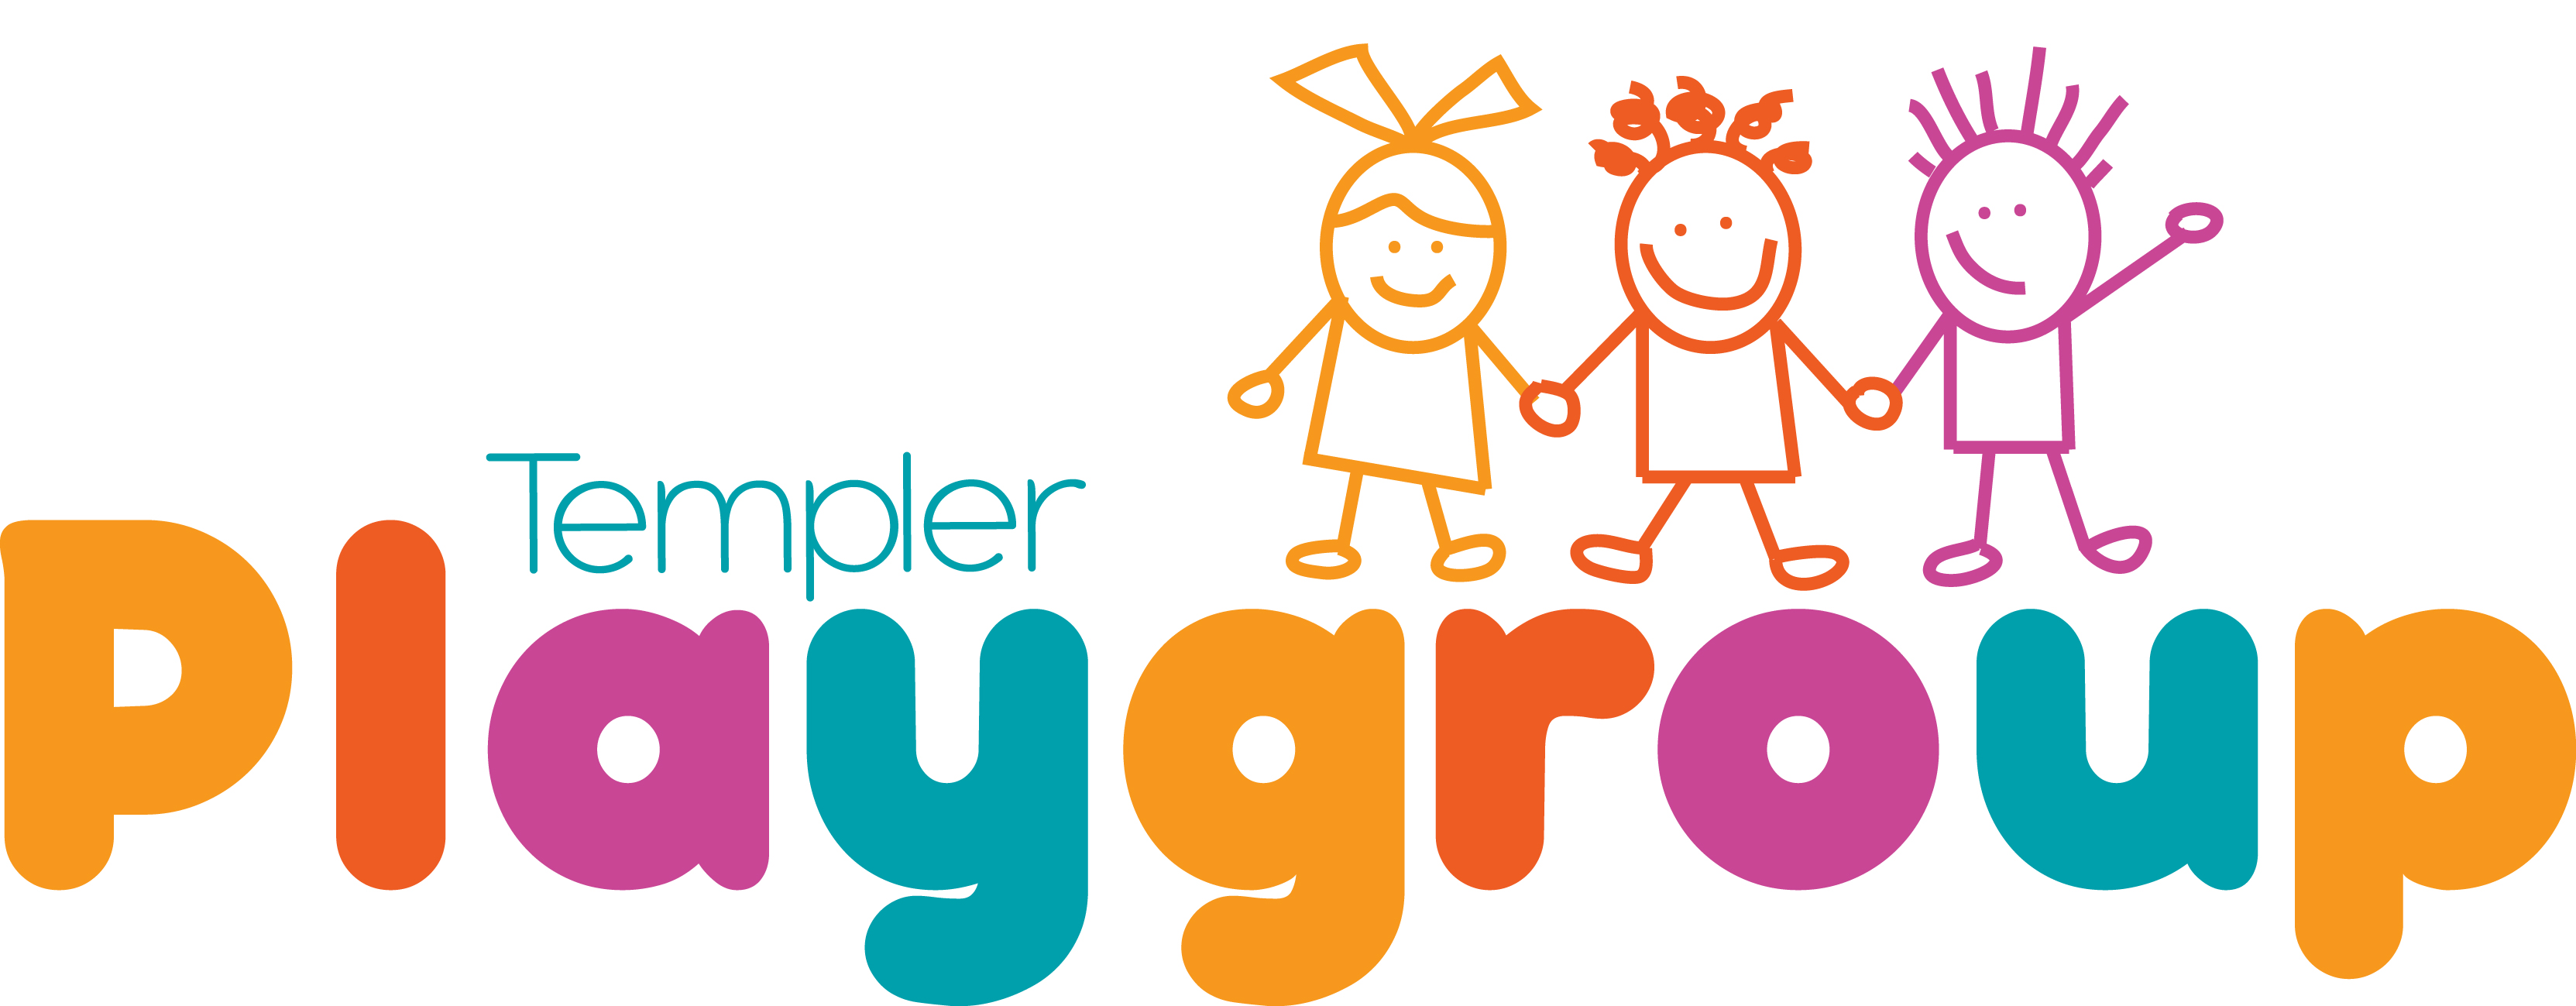 Templer Playgroup